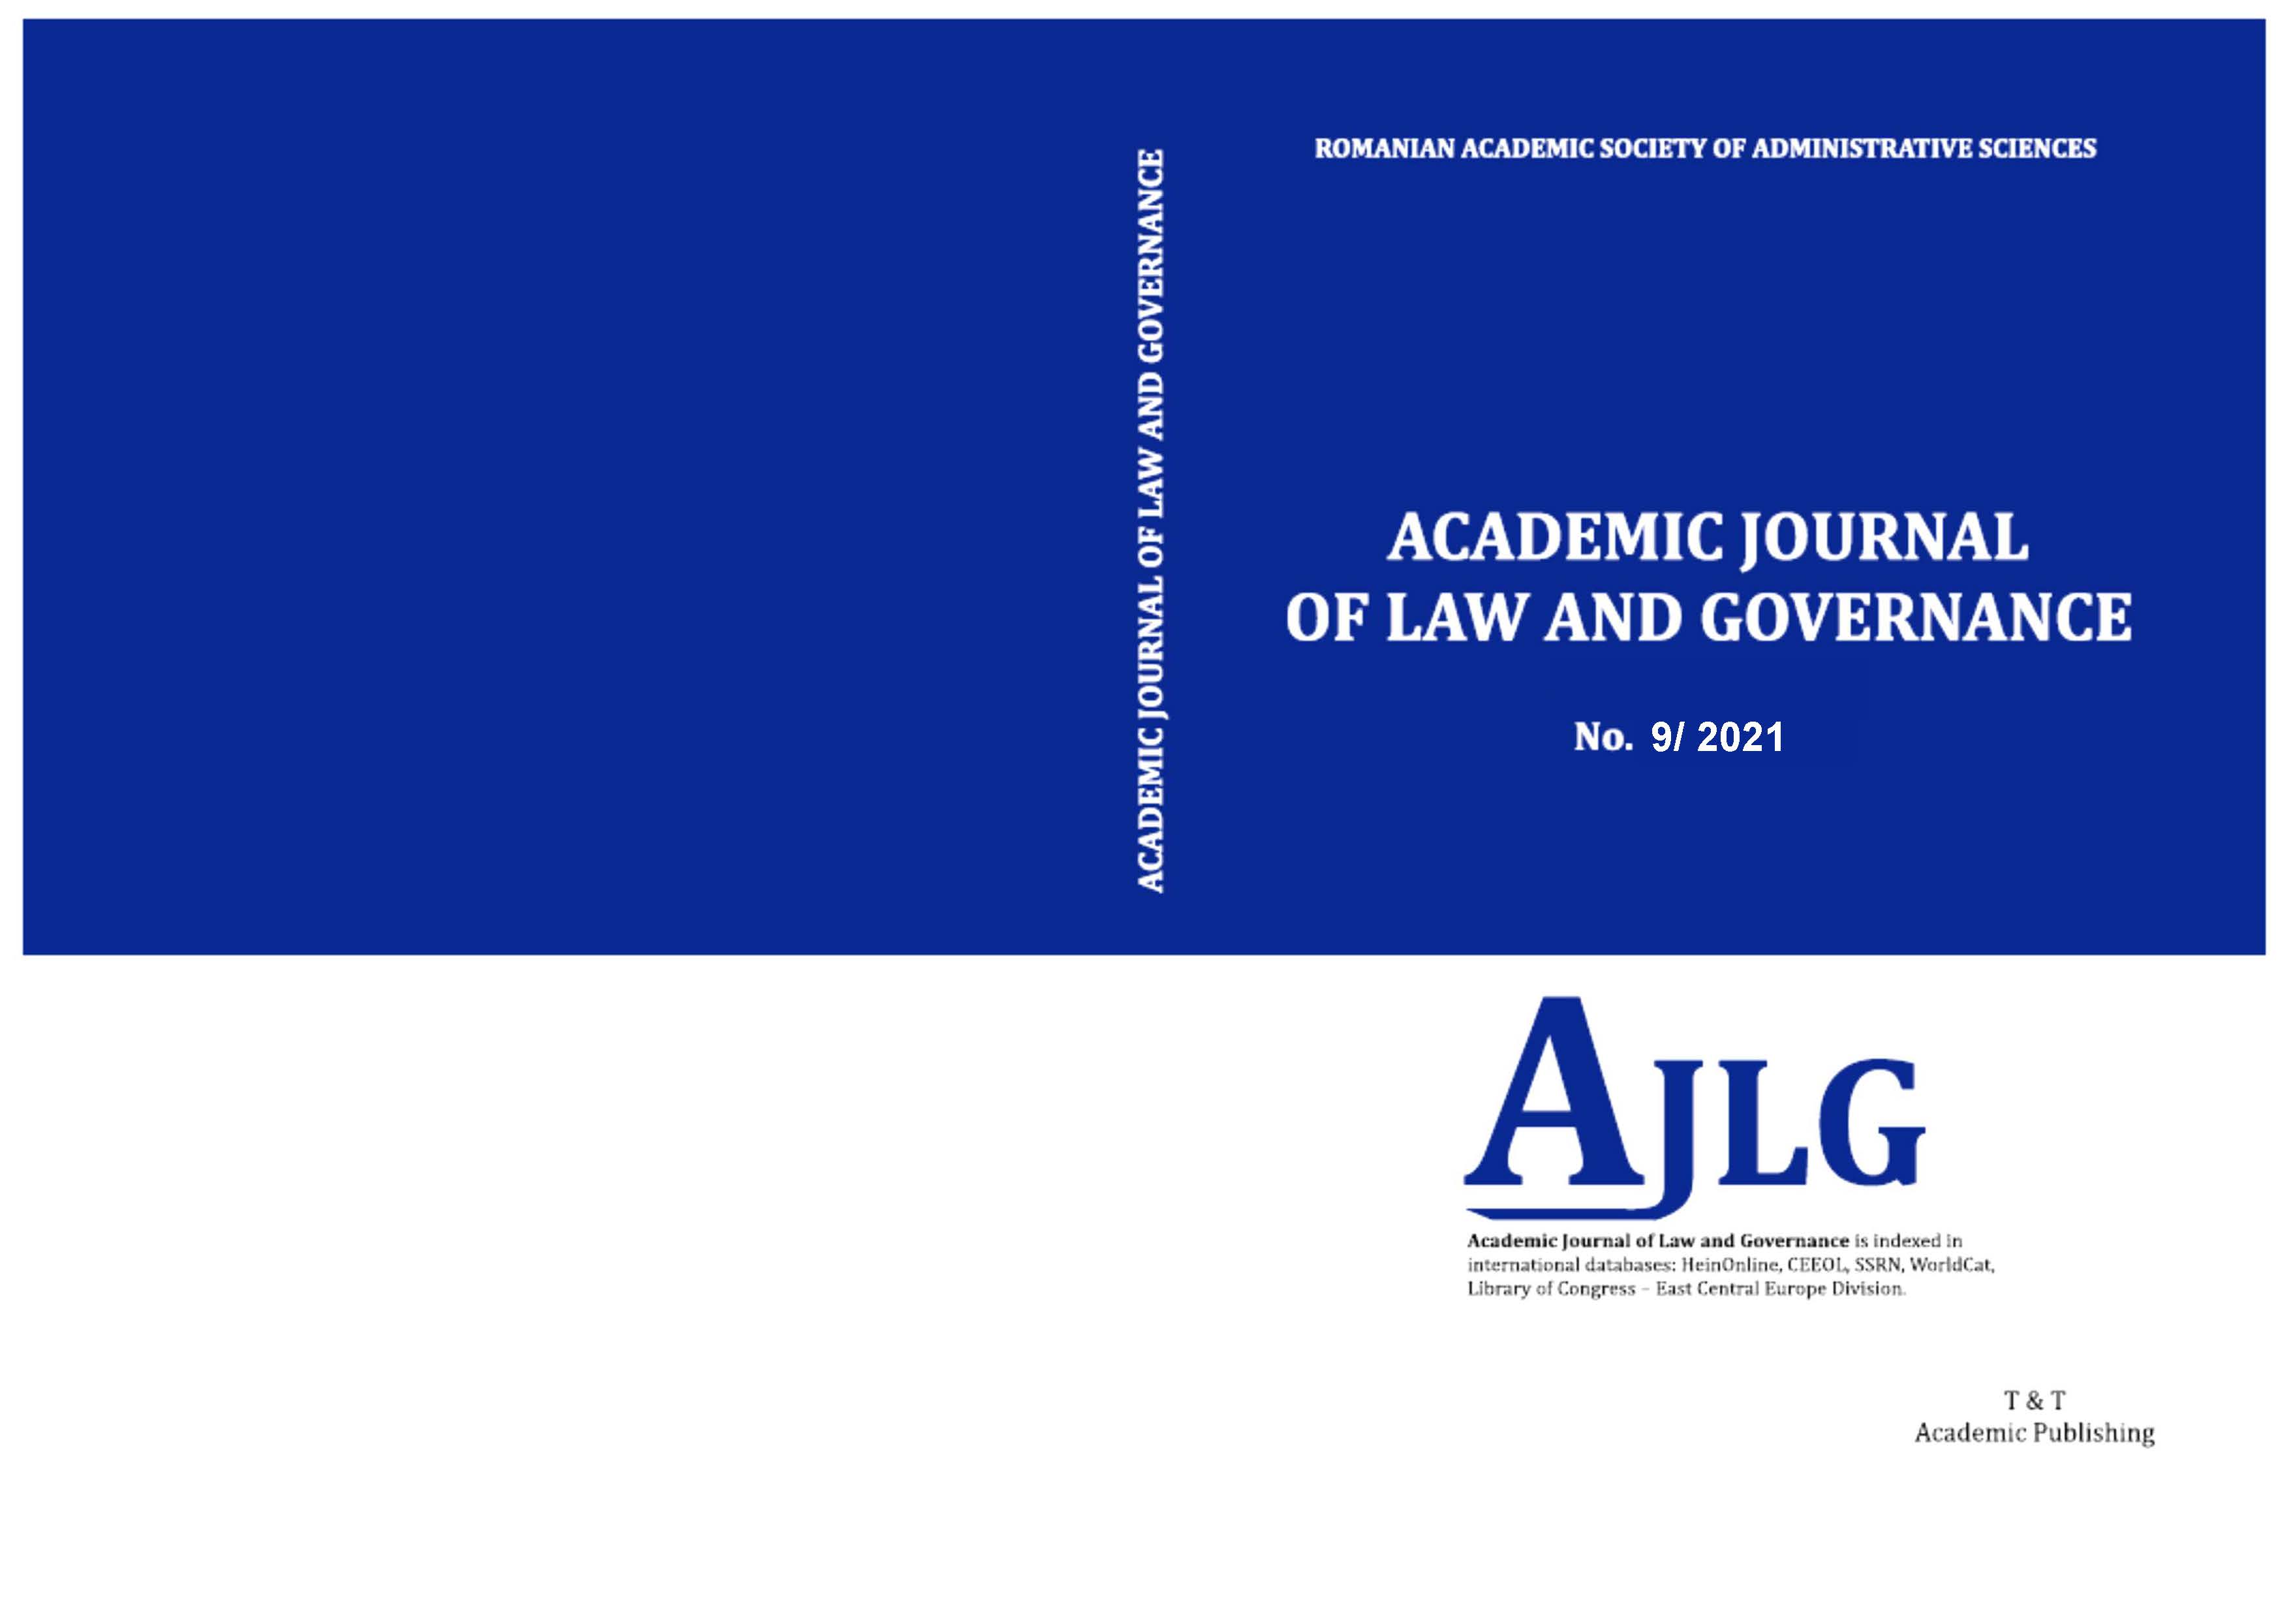 Requirements of the Rule of Law from the Perspective of European Union Law - Primary and Derived European Law